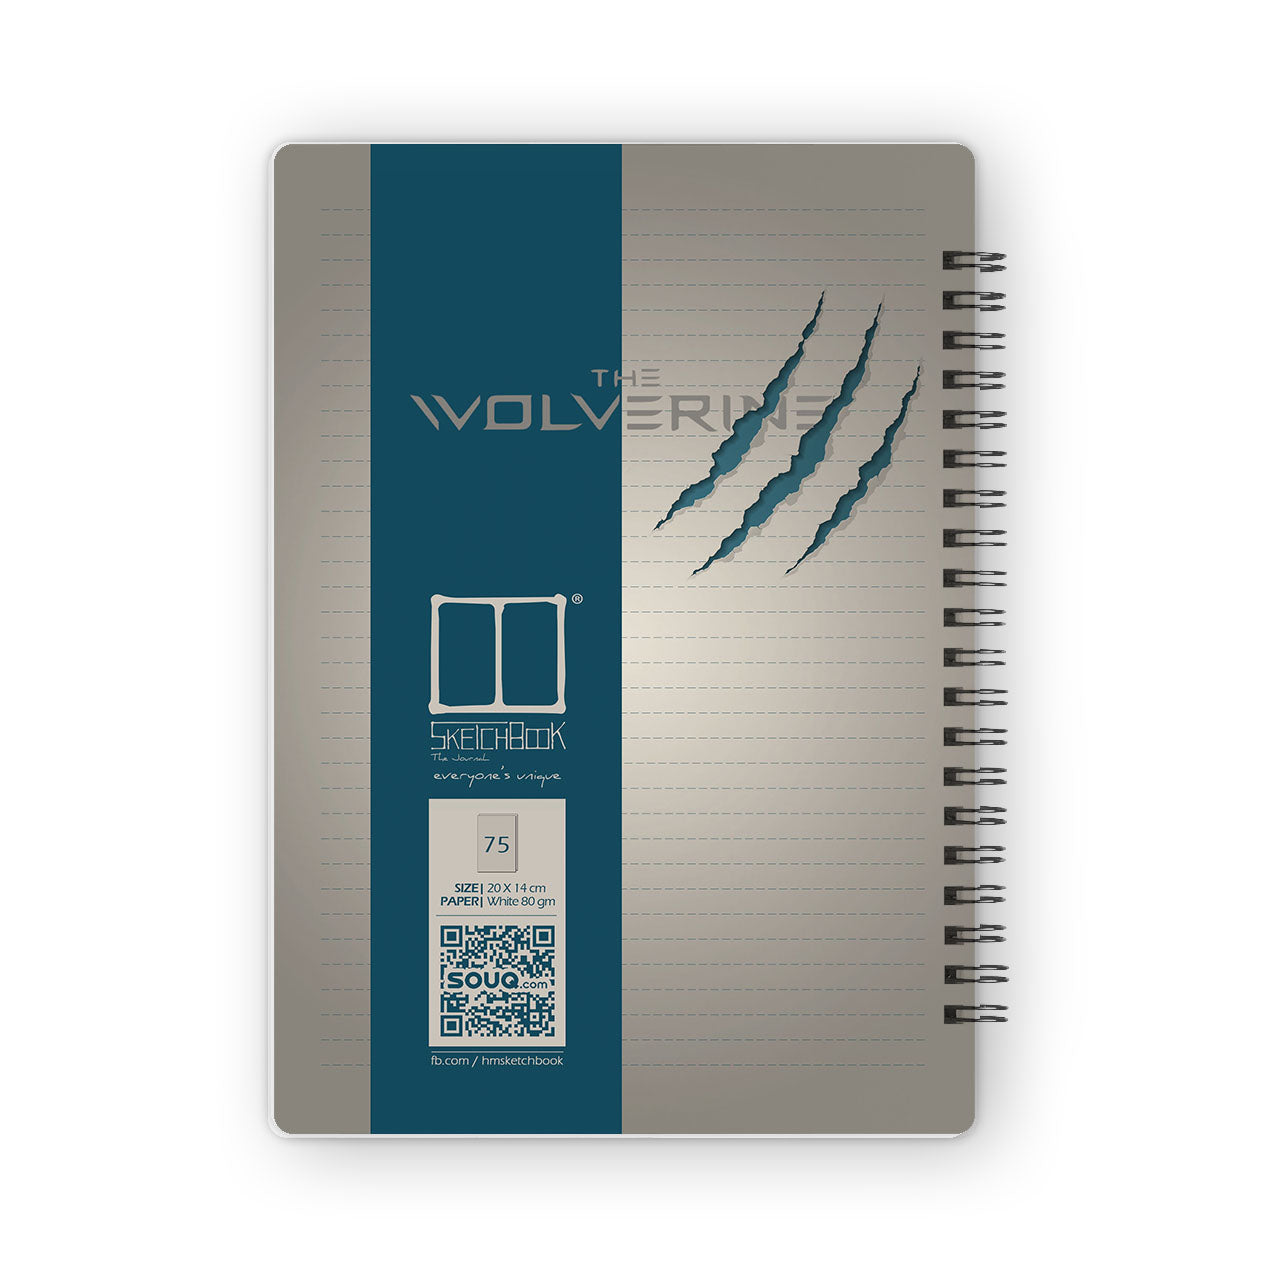 The Journal | 20 X 14 cm - The Wolverine - from SketchBook Stationery